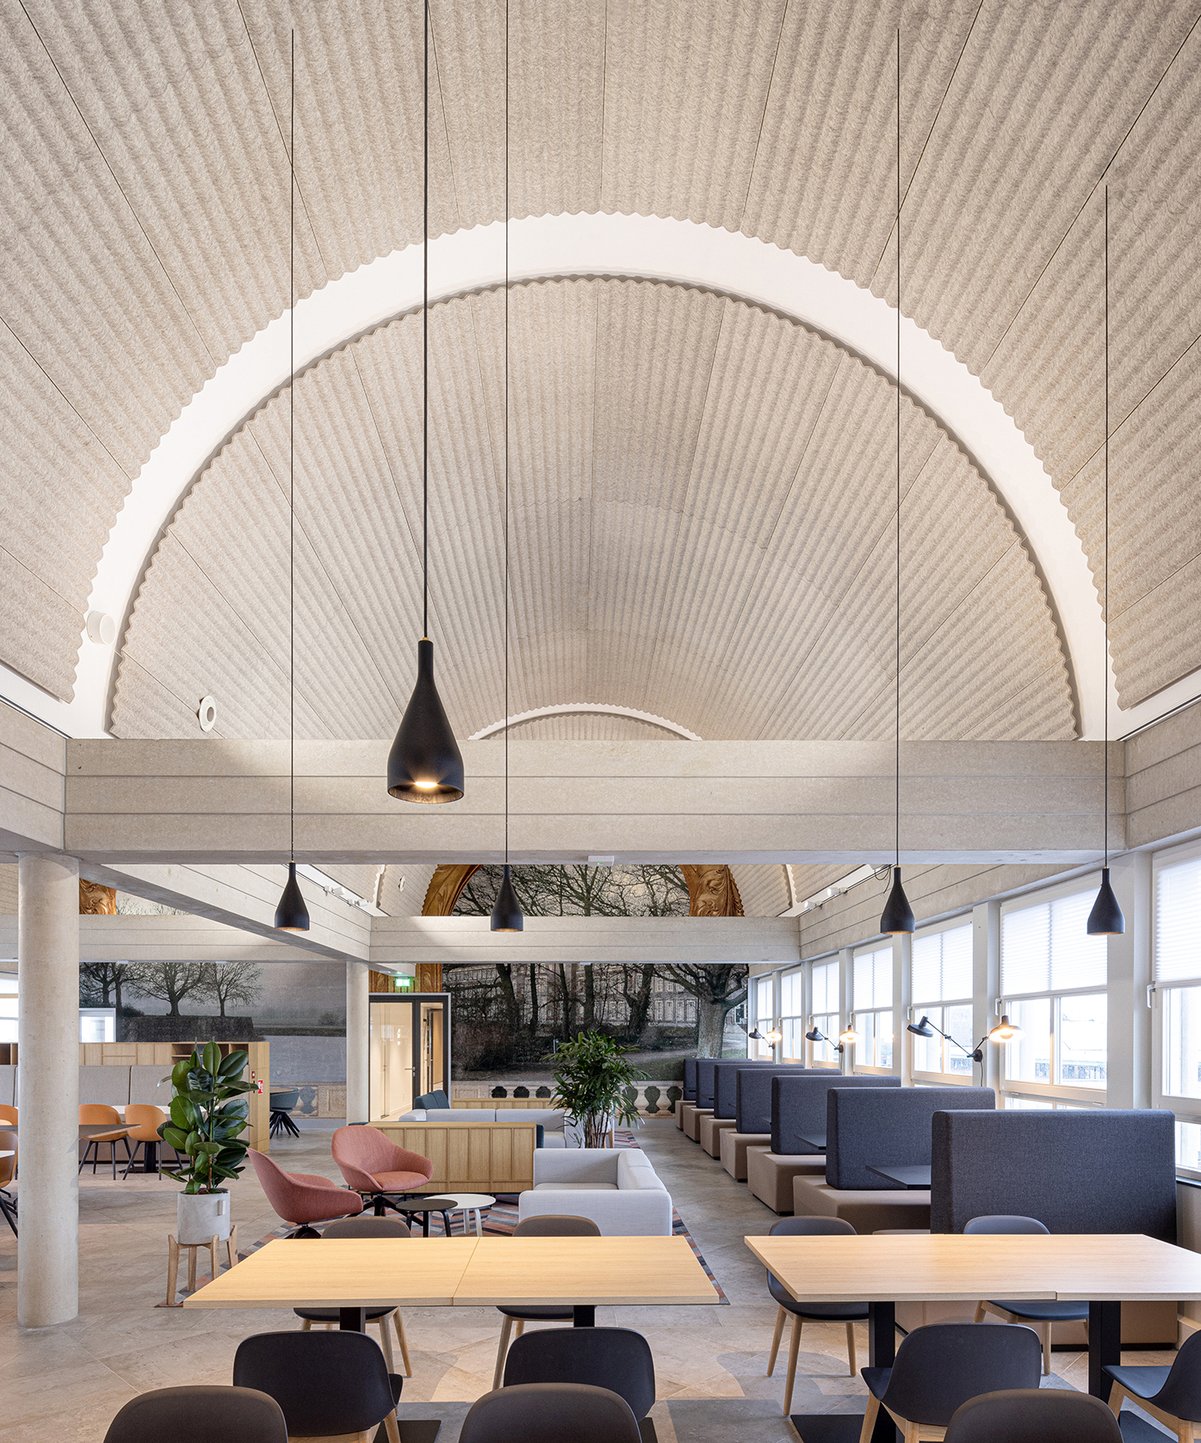 renovation of the Palace of Justice in Den Bosch